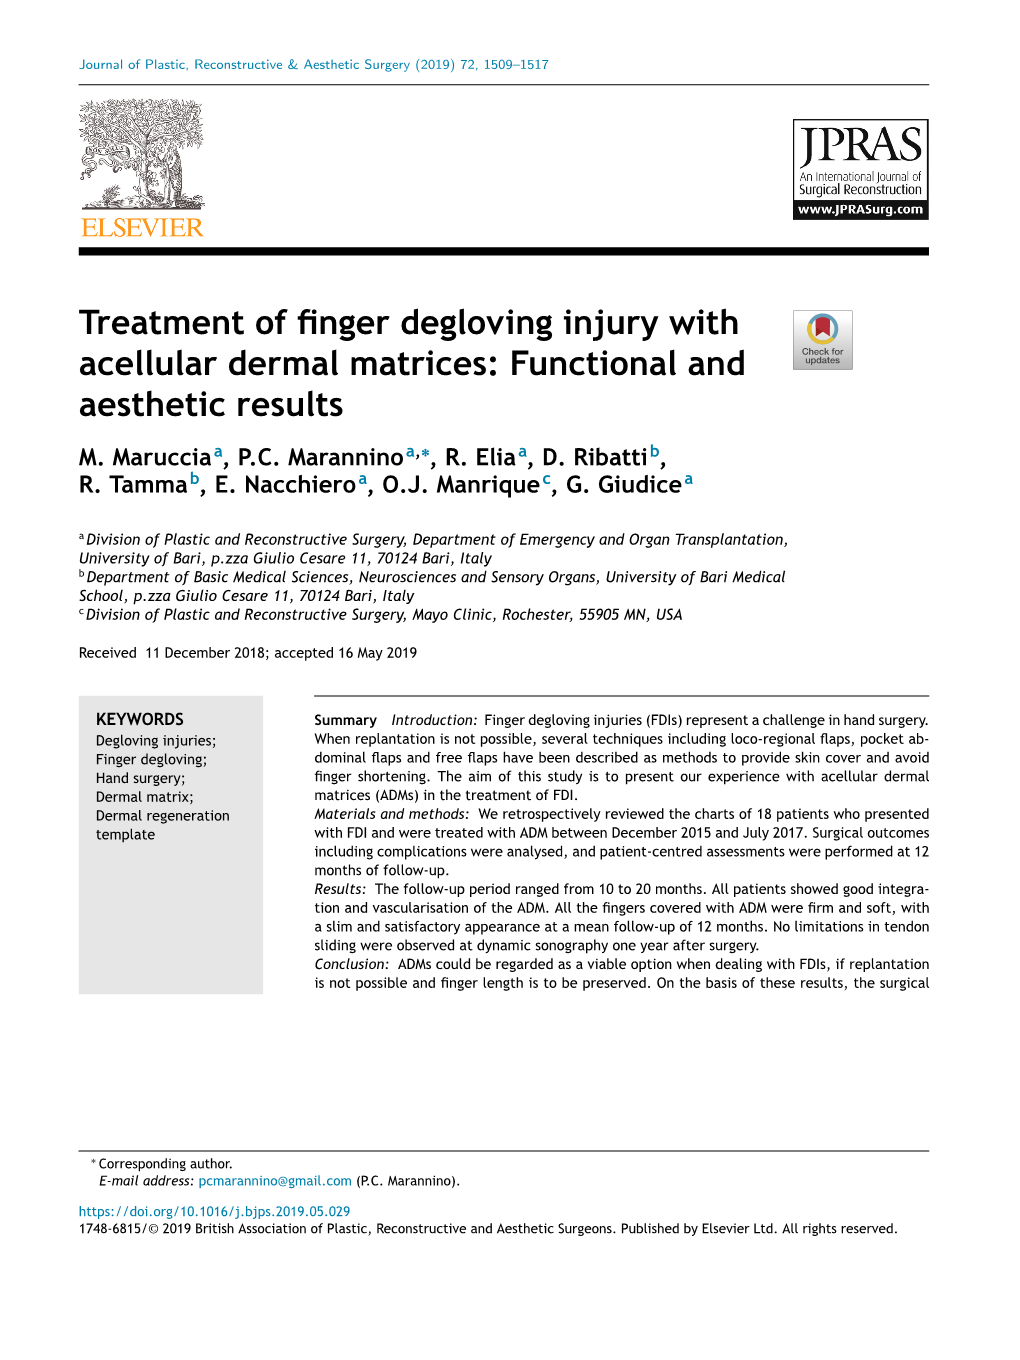 Treatment of Finger Degloving Injury with Acellular Dermal Matrices 1511